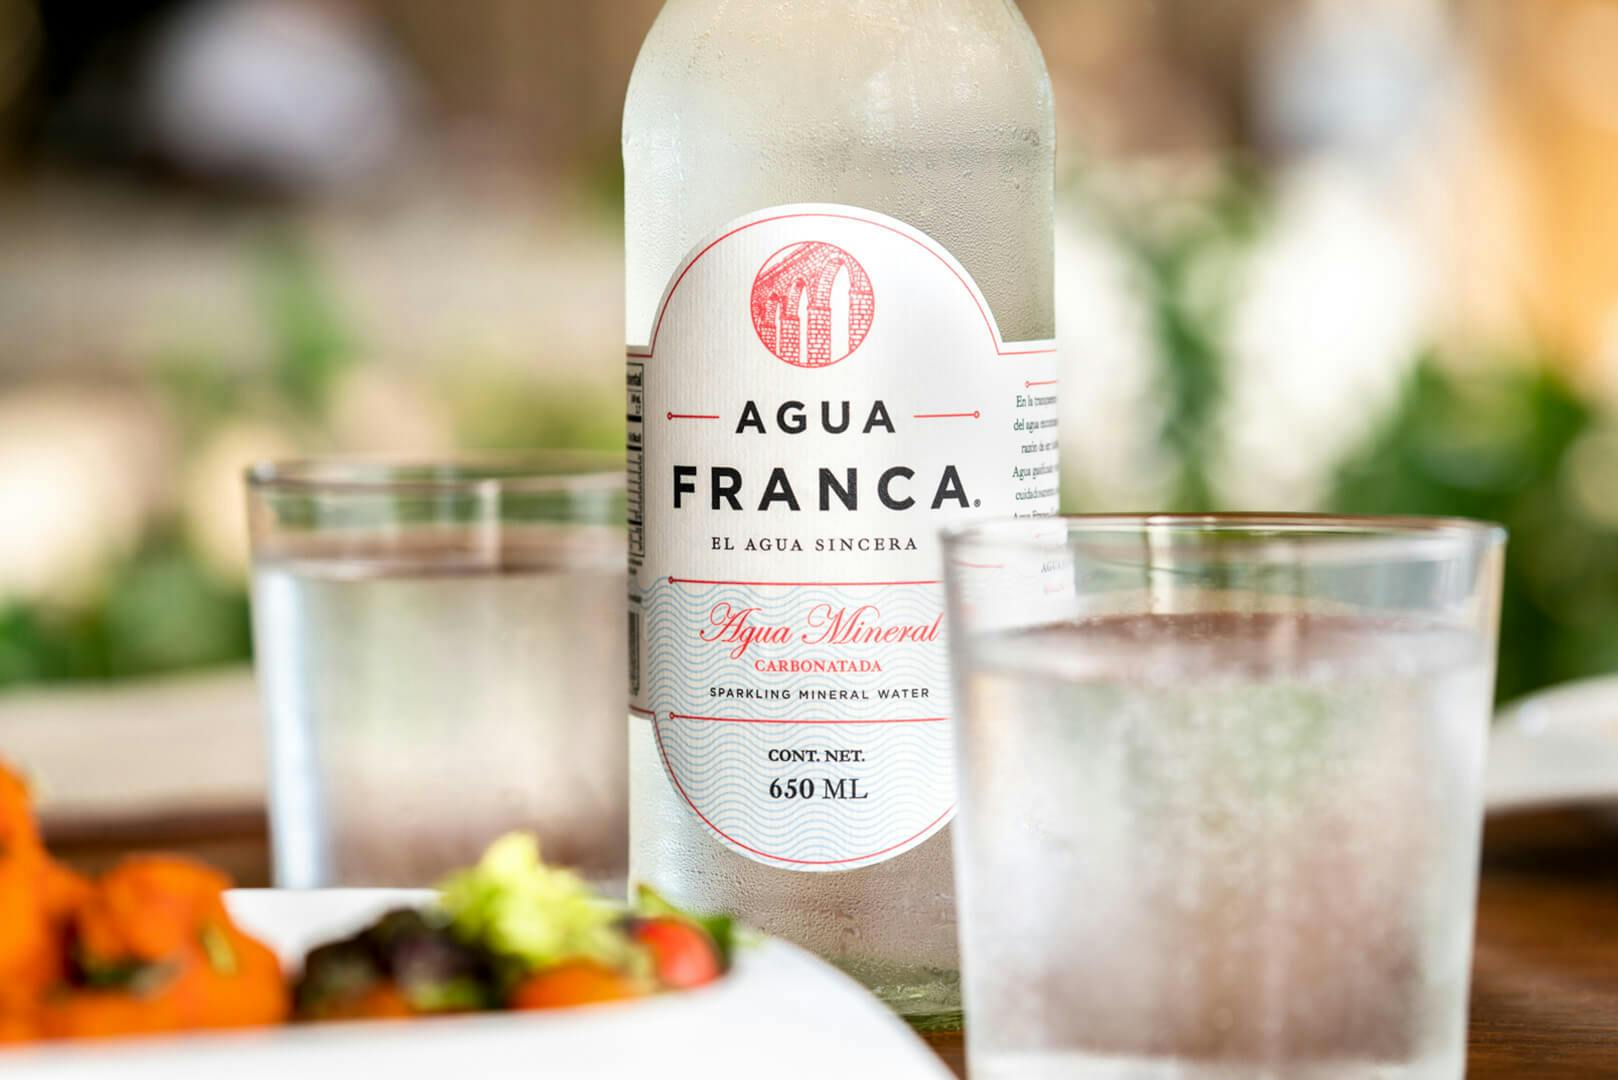 Image of ‘Something New’ for the Agua Franca Label